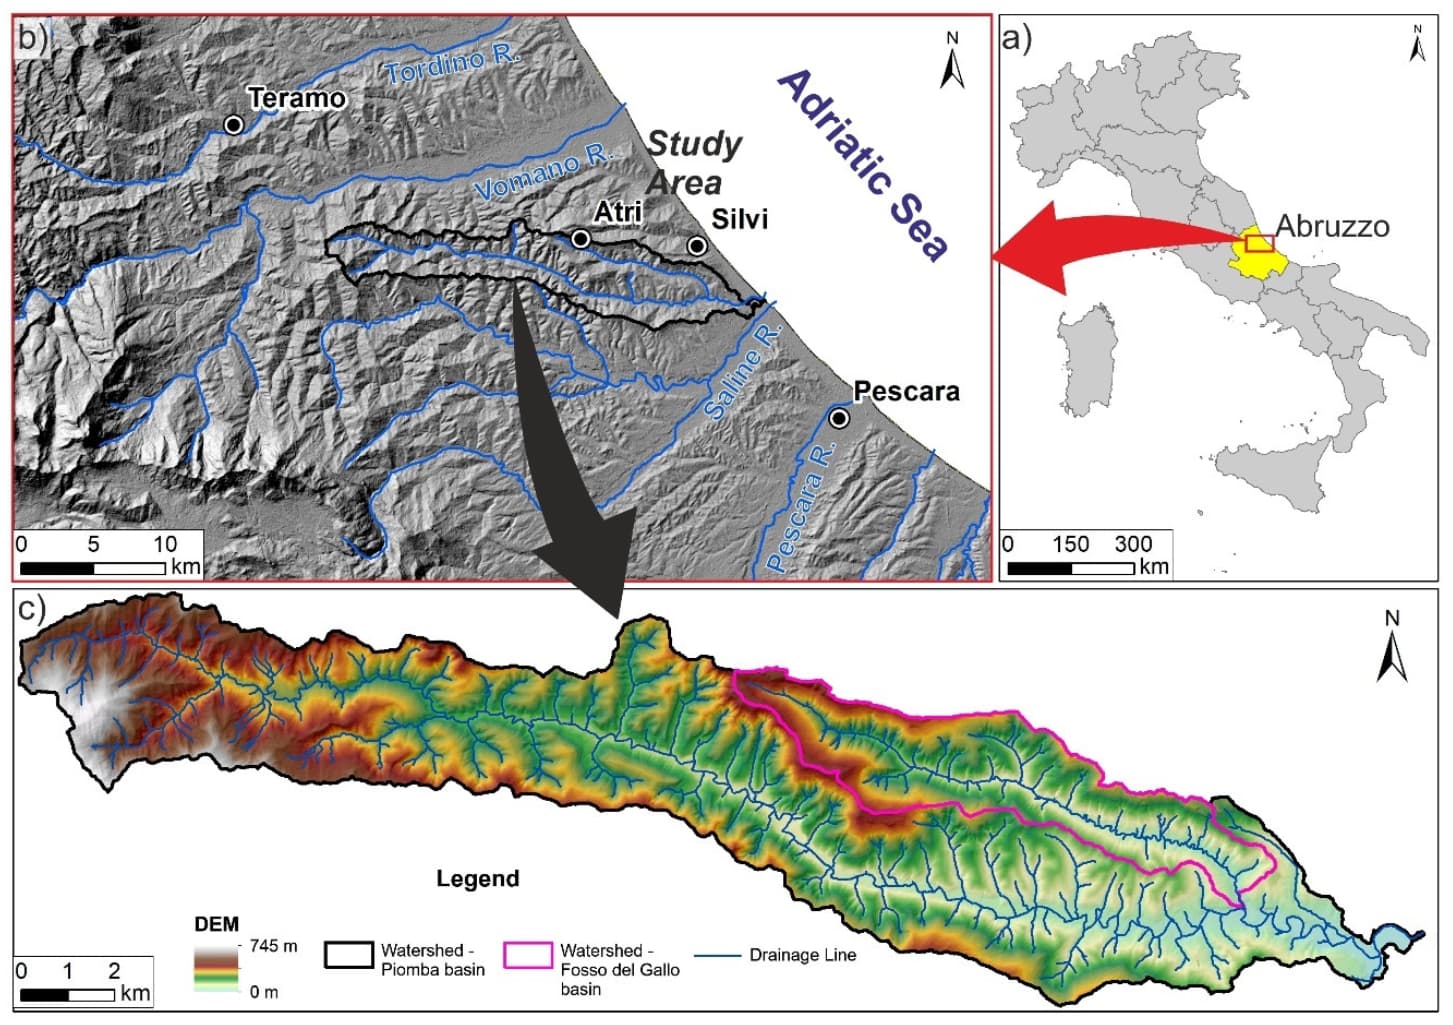 Landslide Susceptibility Mapping by Comparing GIS-Based Bivariate Methods: A Focus on the Geomorphological Implication of the Statistical Results